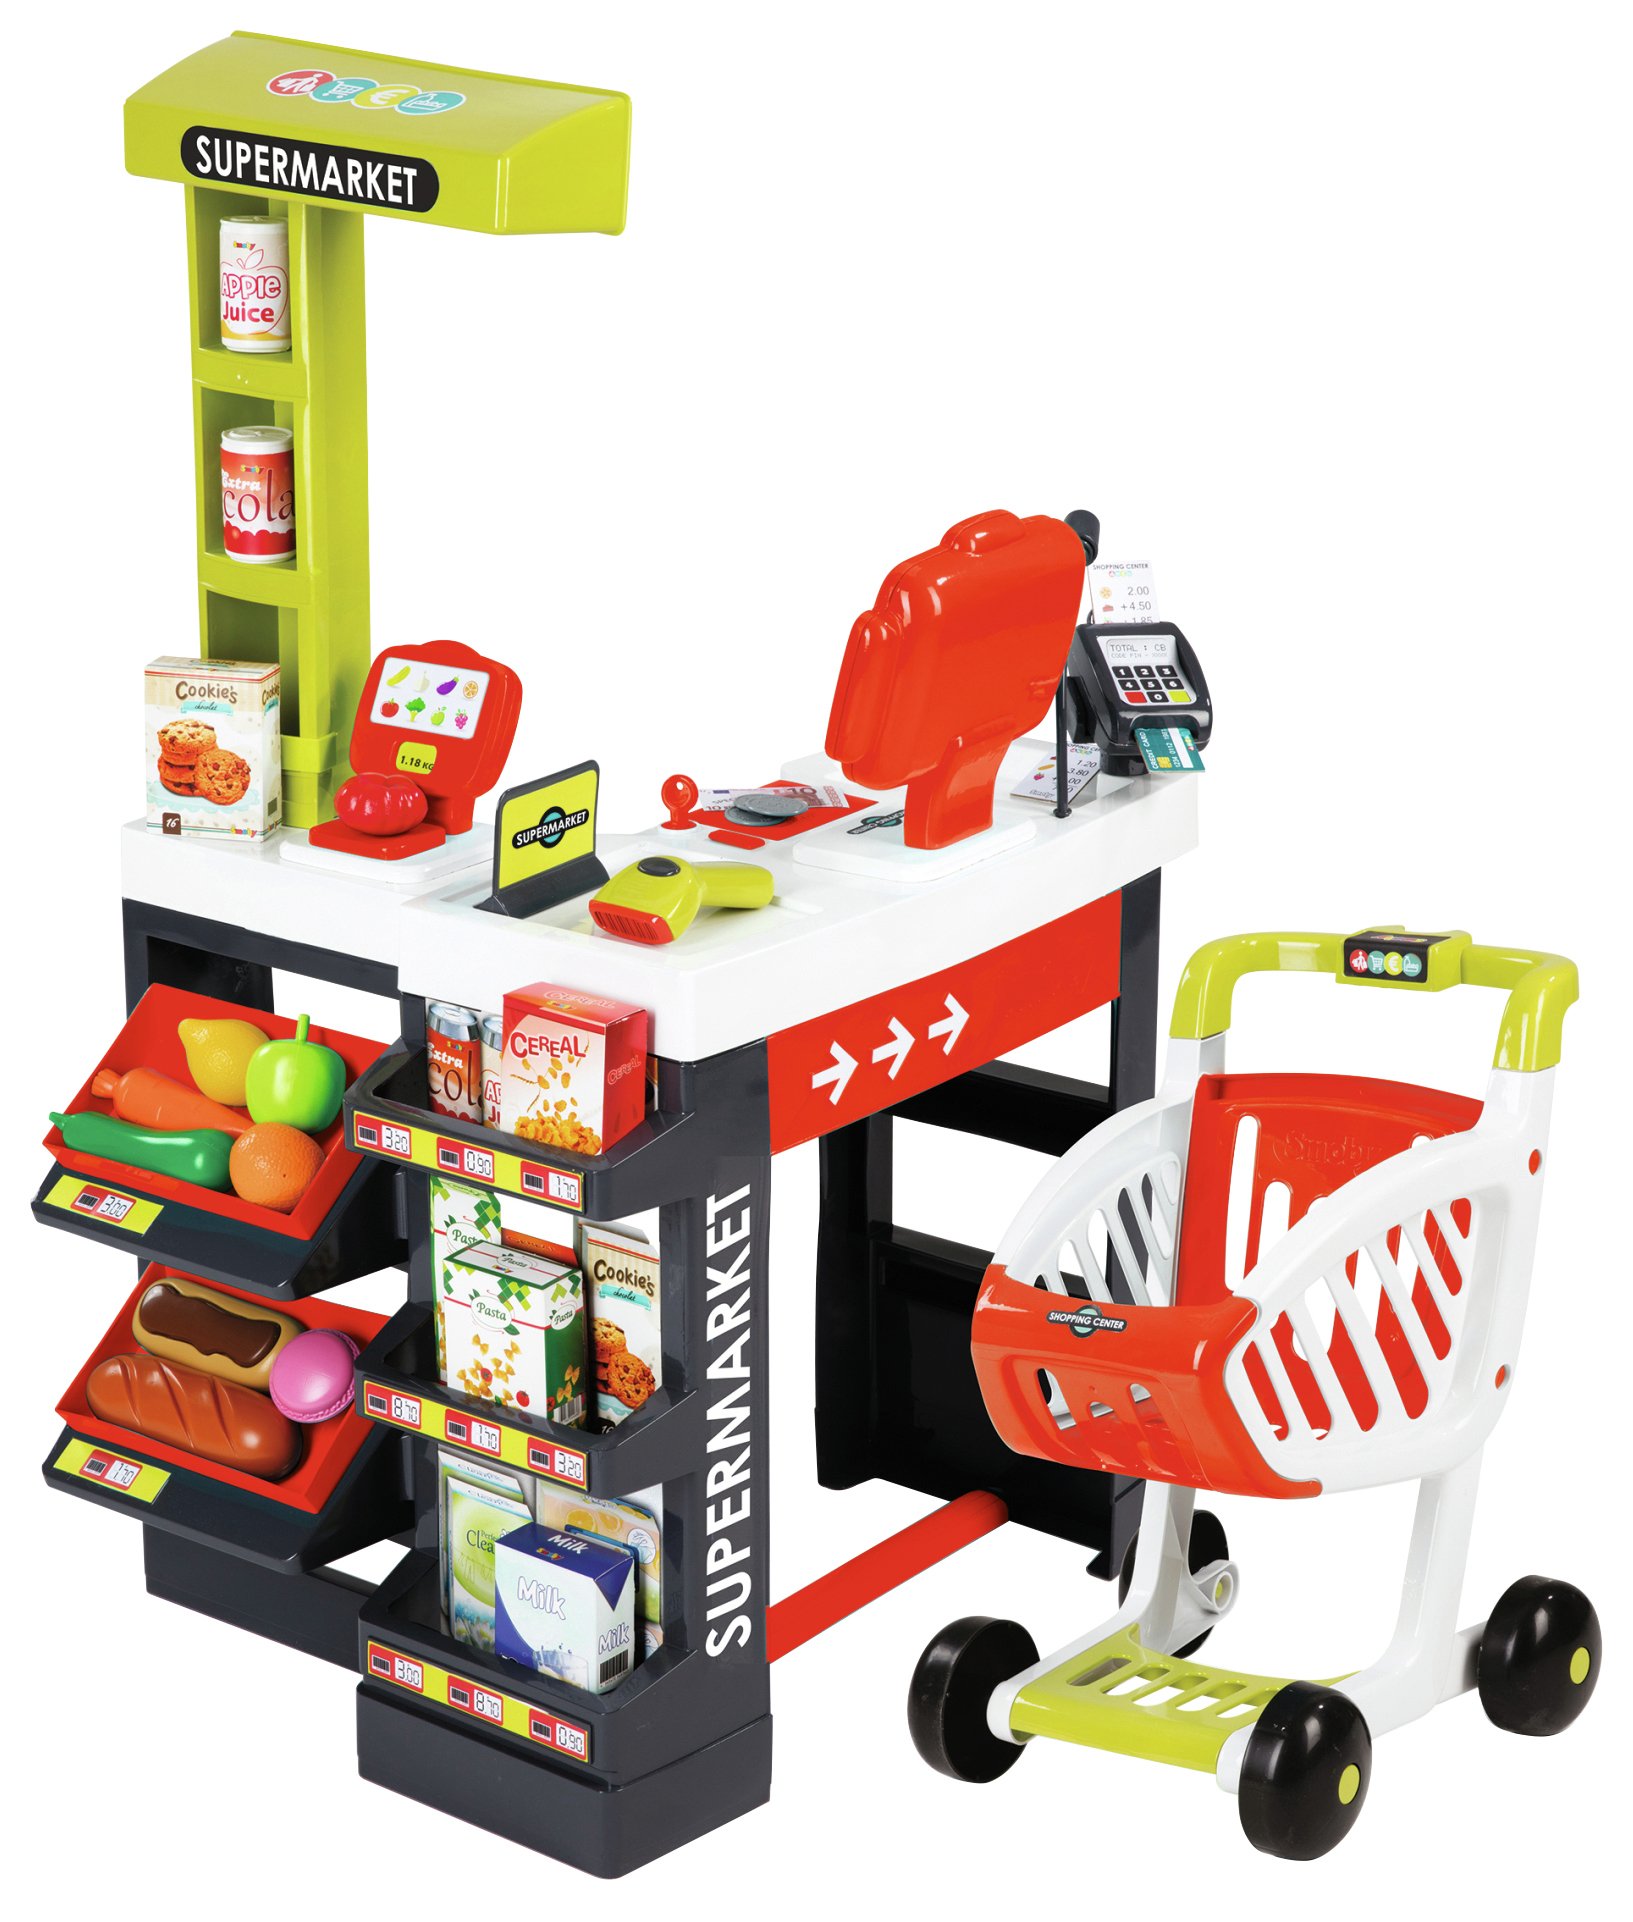 Smoby Supermarket Playset Review